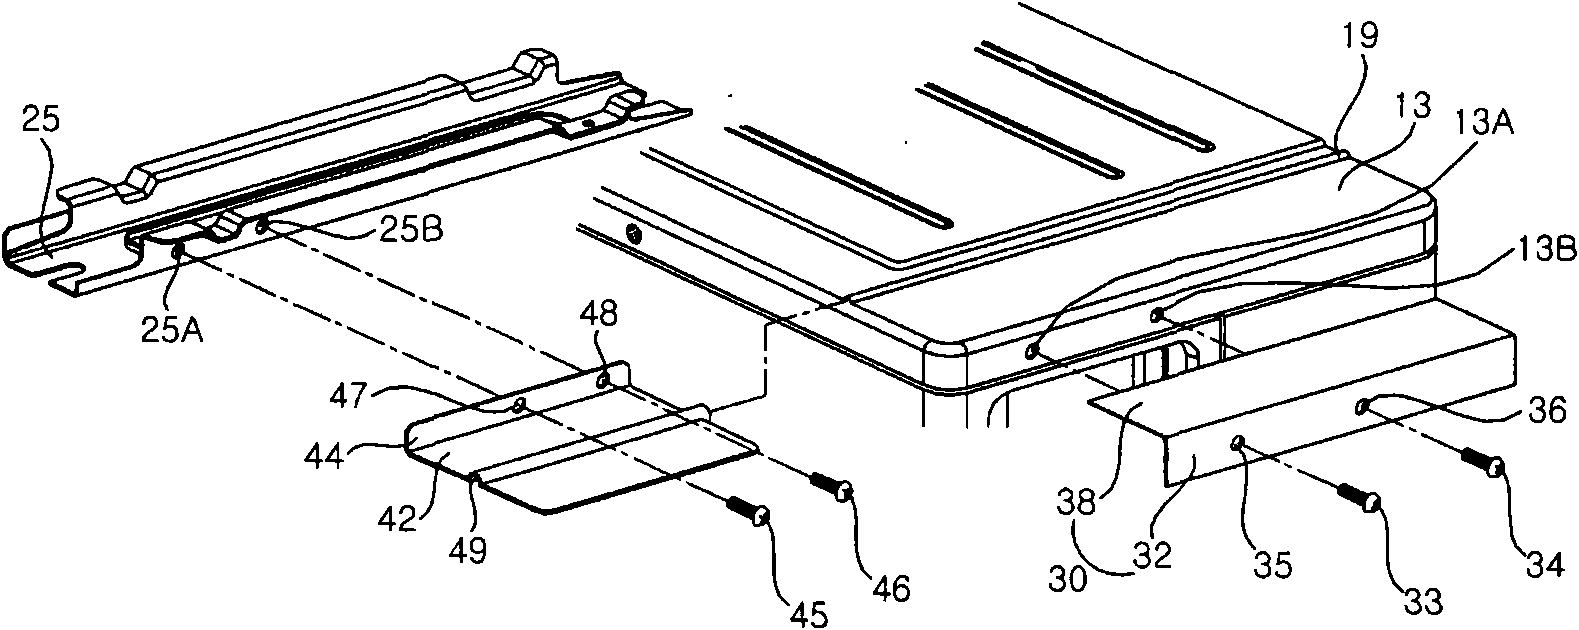 Stacking device of outdoor units of air conditioners and laminated structure of outdoor units